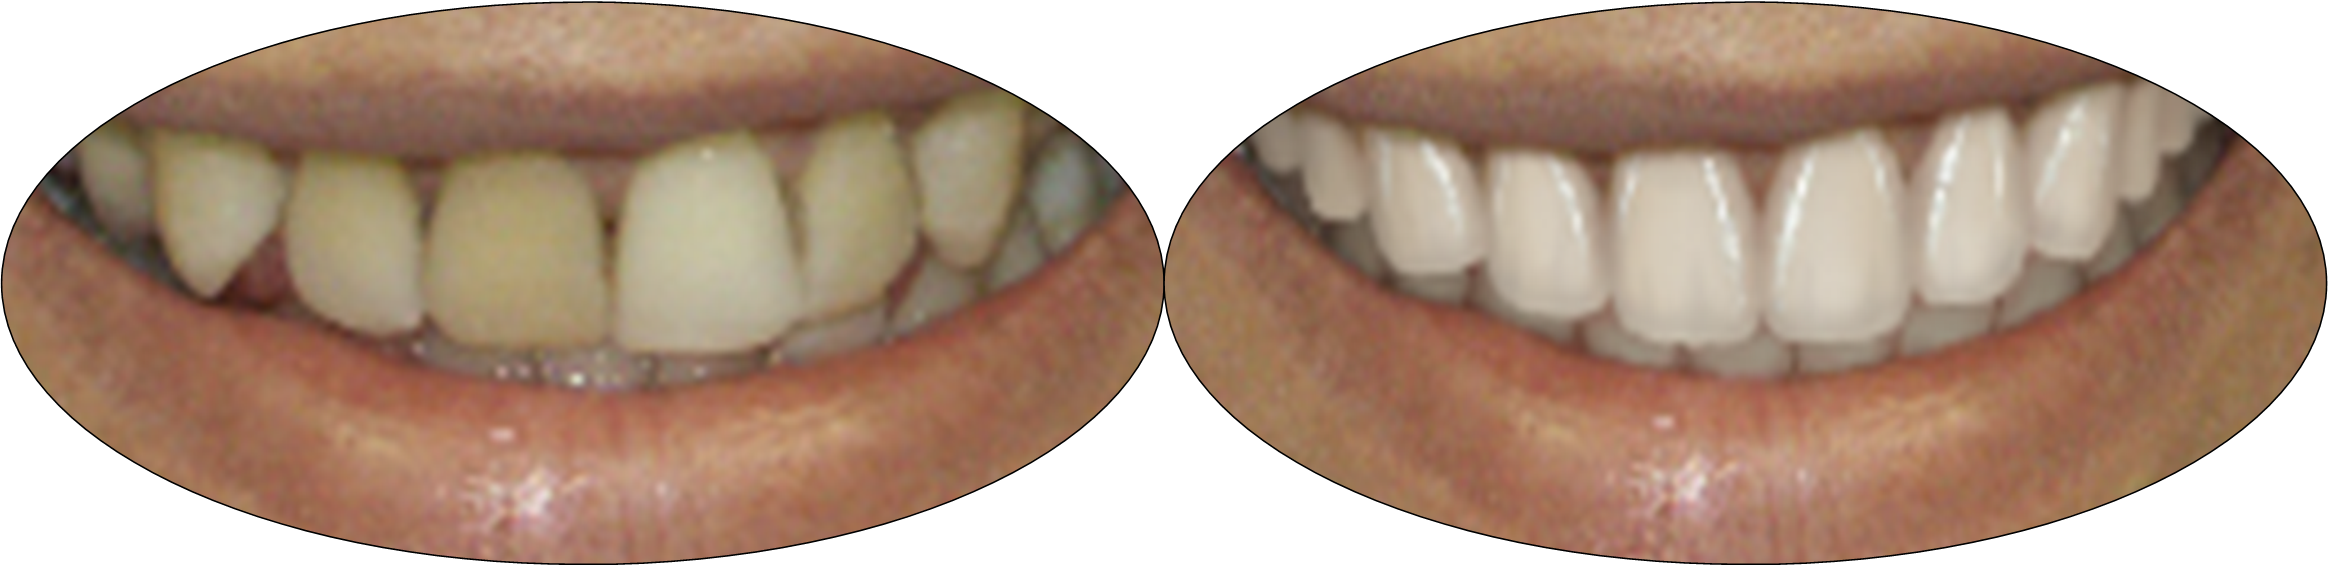 Before and after smile photos of patient with porcelain veneers